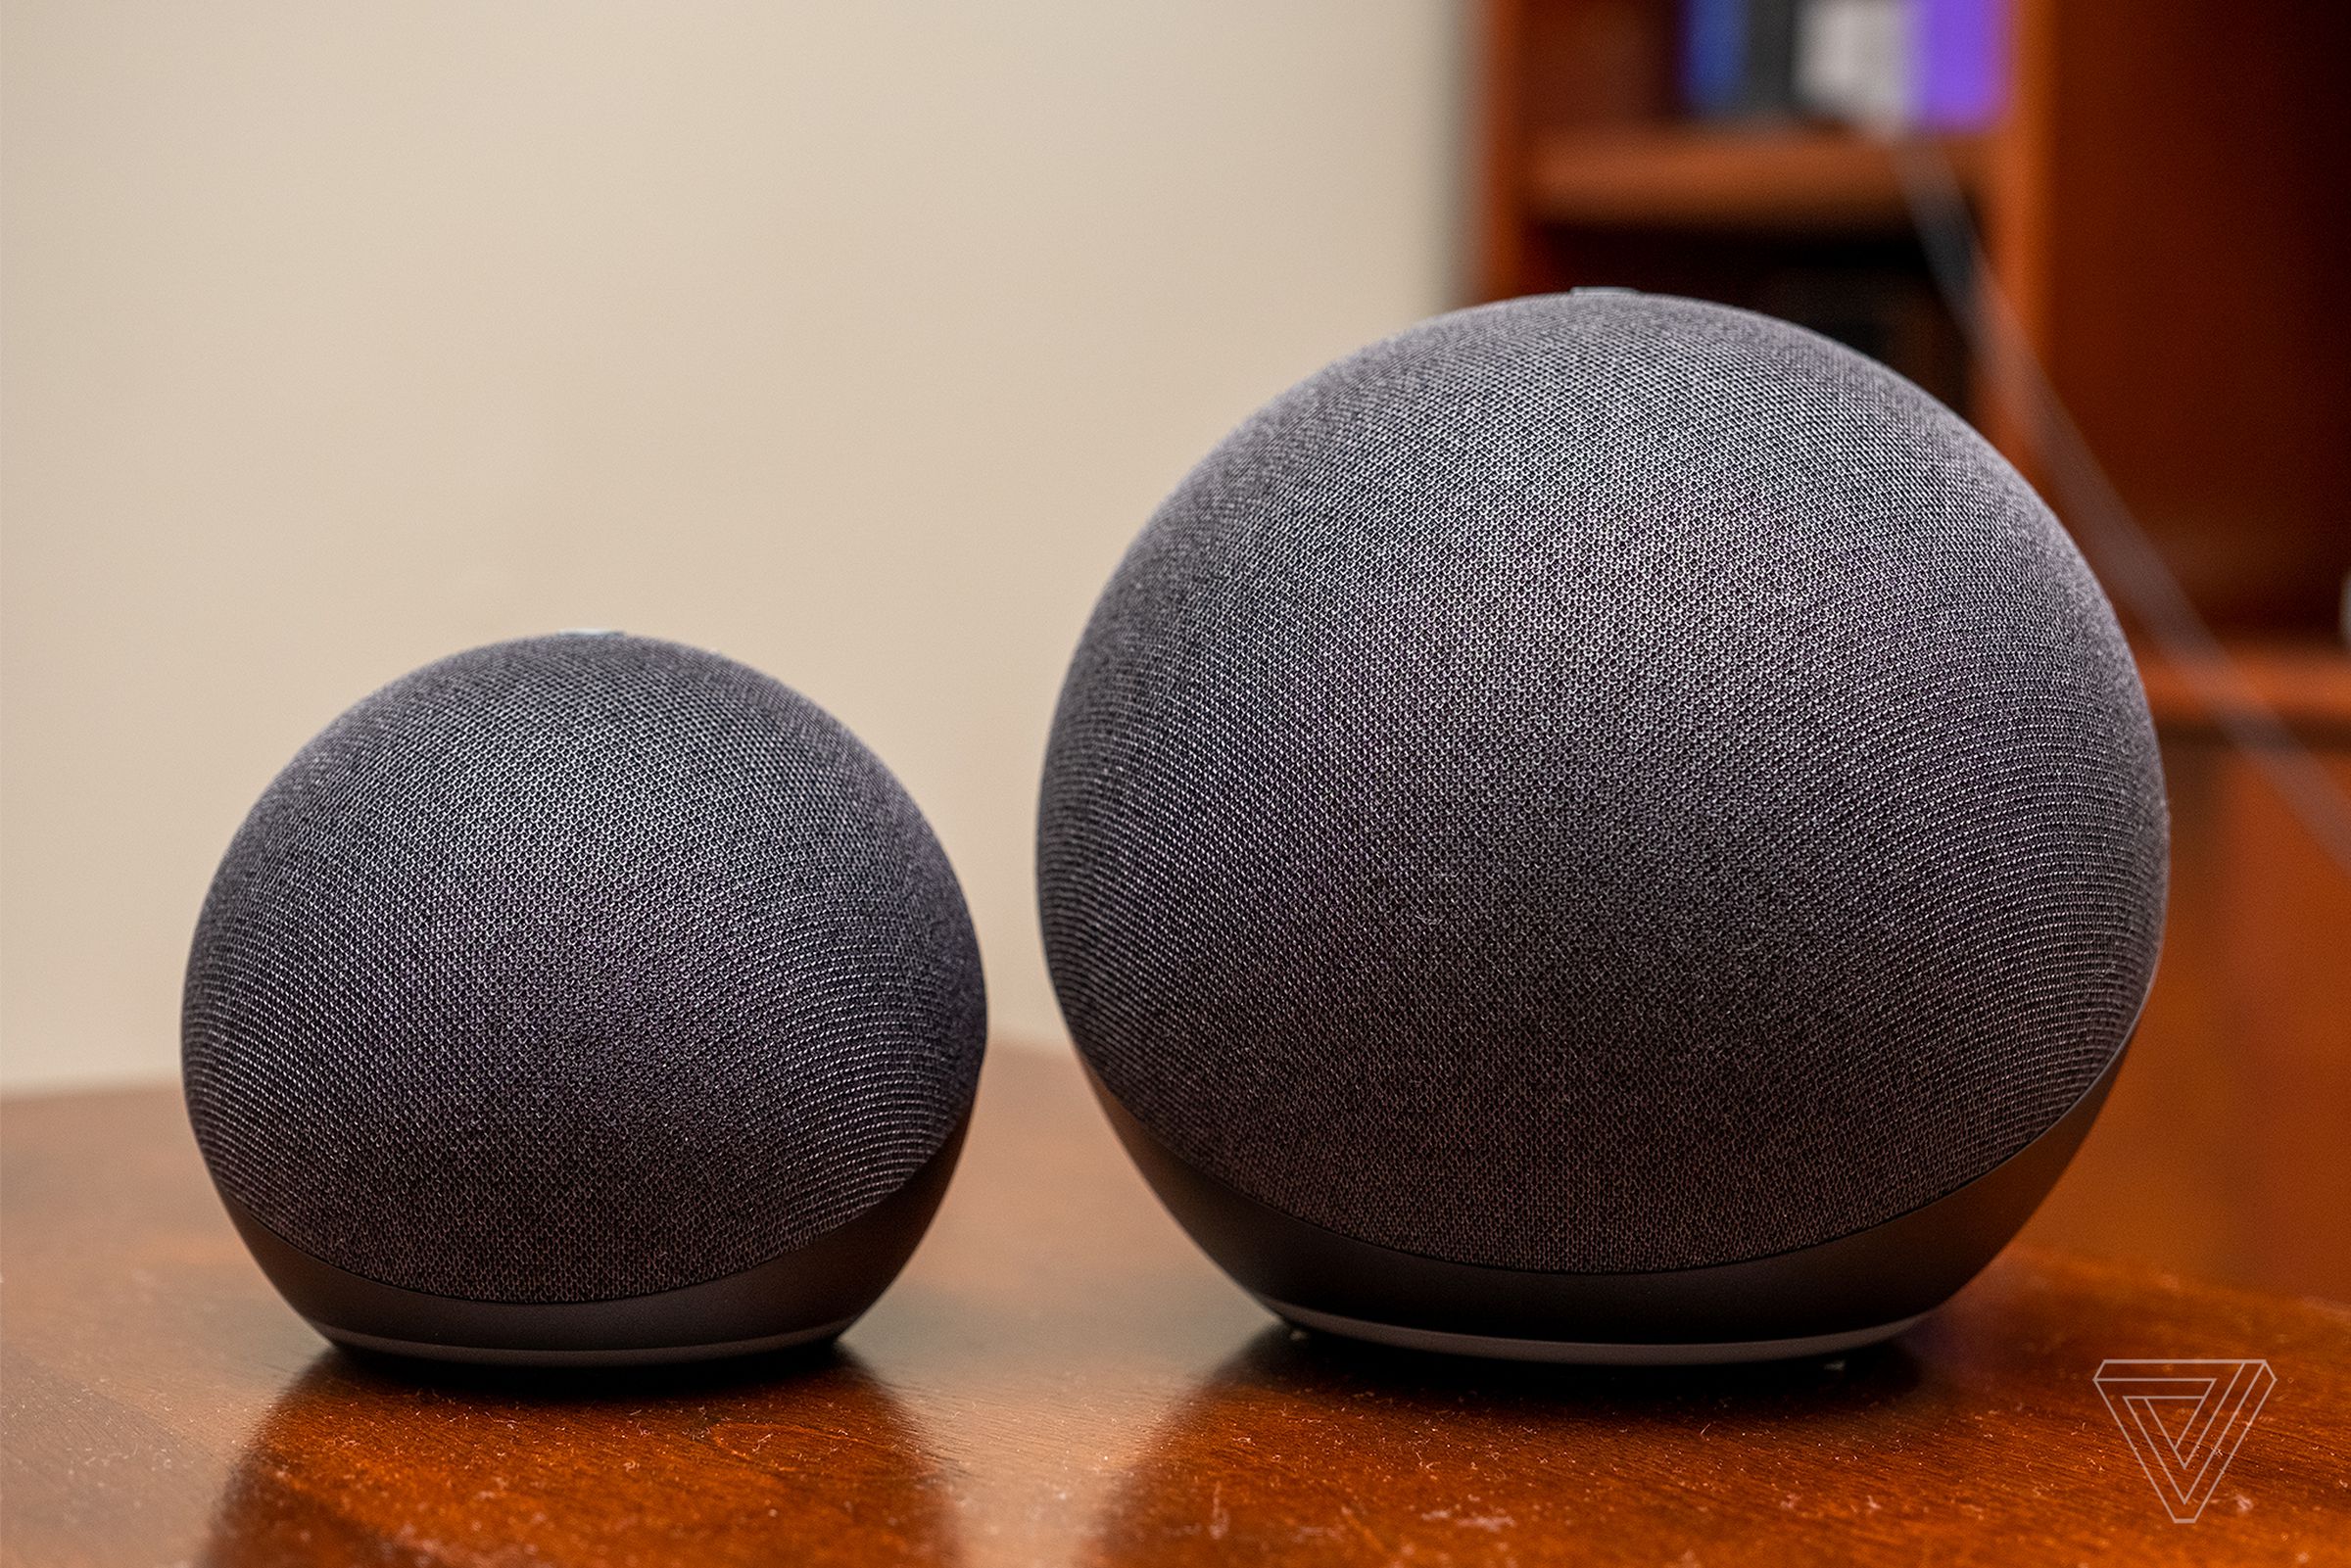 The new Dot echoes the design of the new full-size Echo.